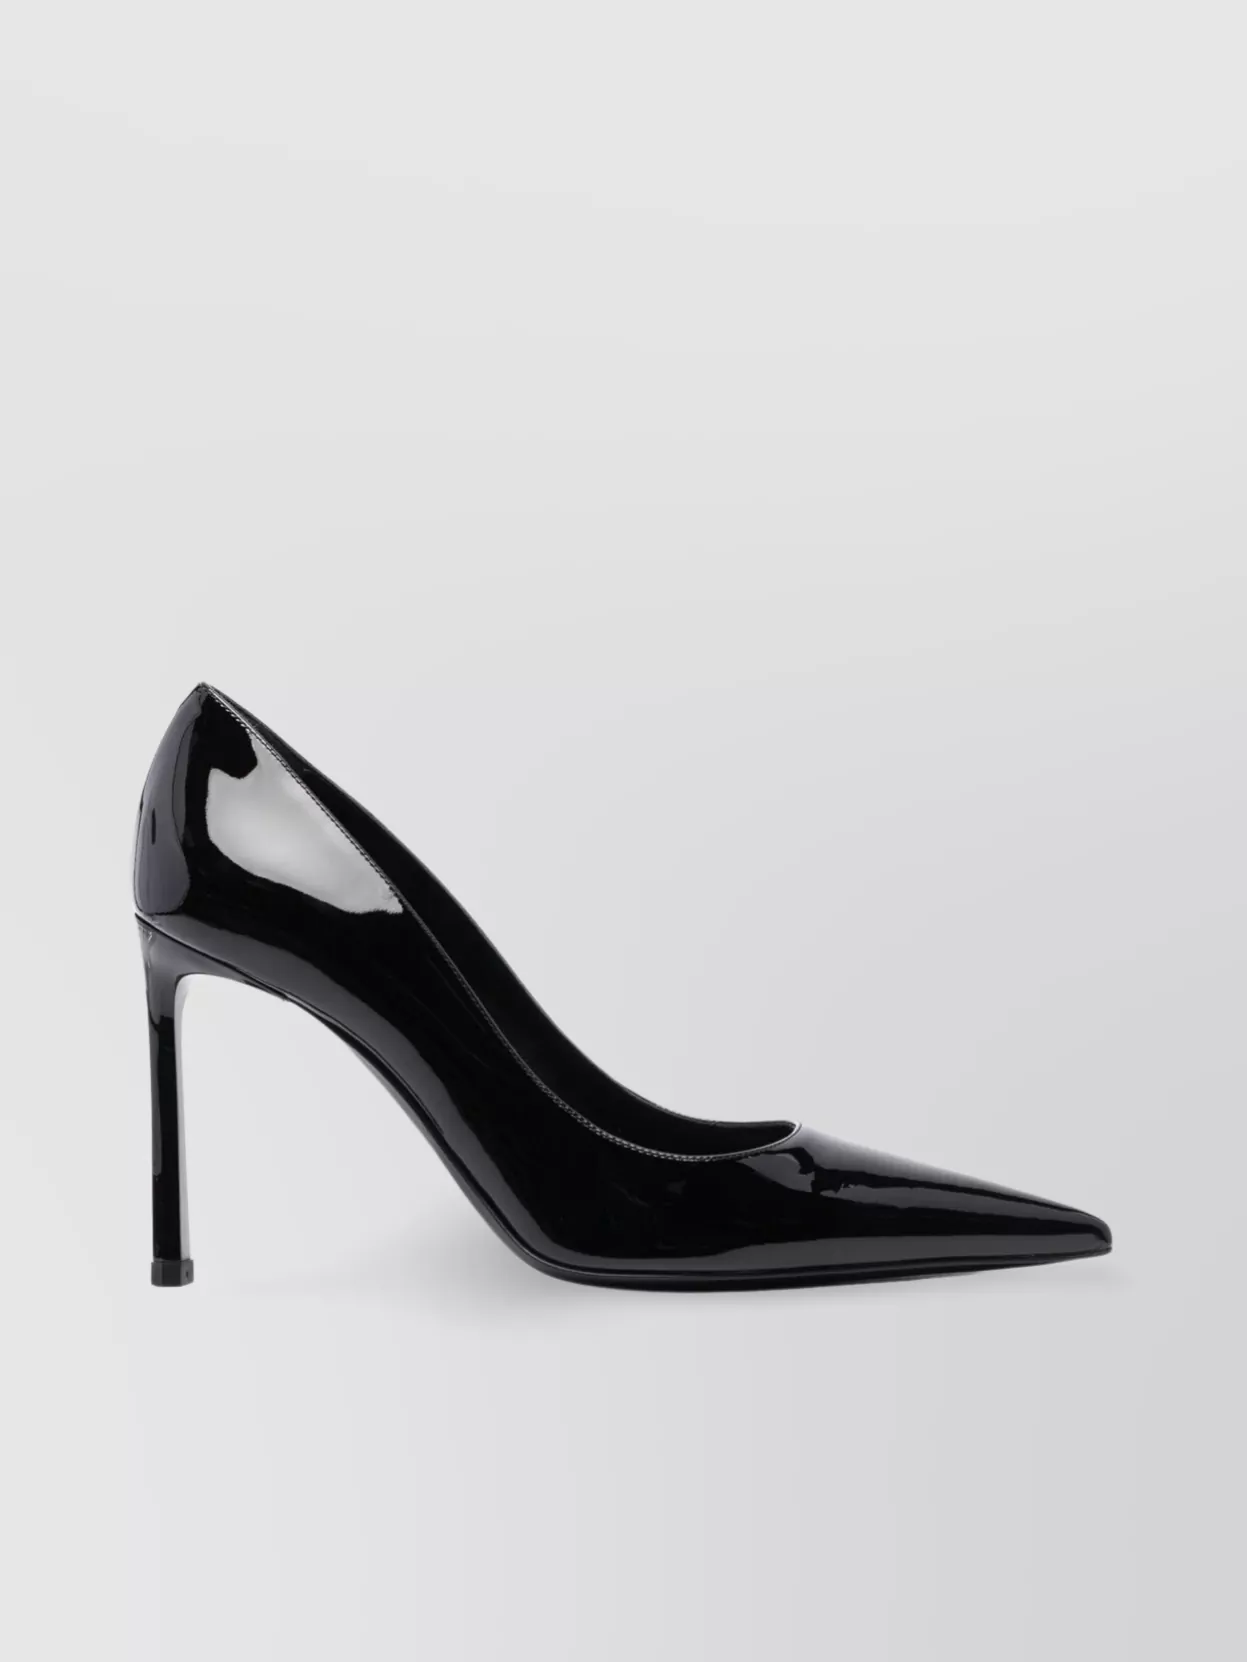 Sergio Rossi 100mm Pointed Patent Pumps In Black